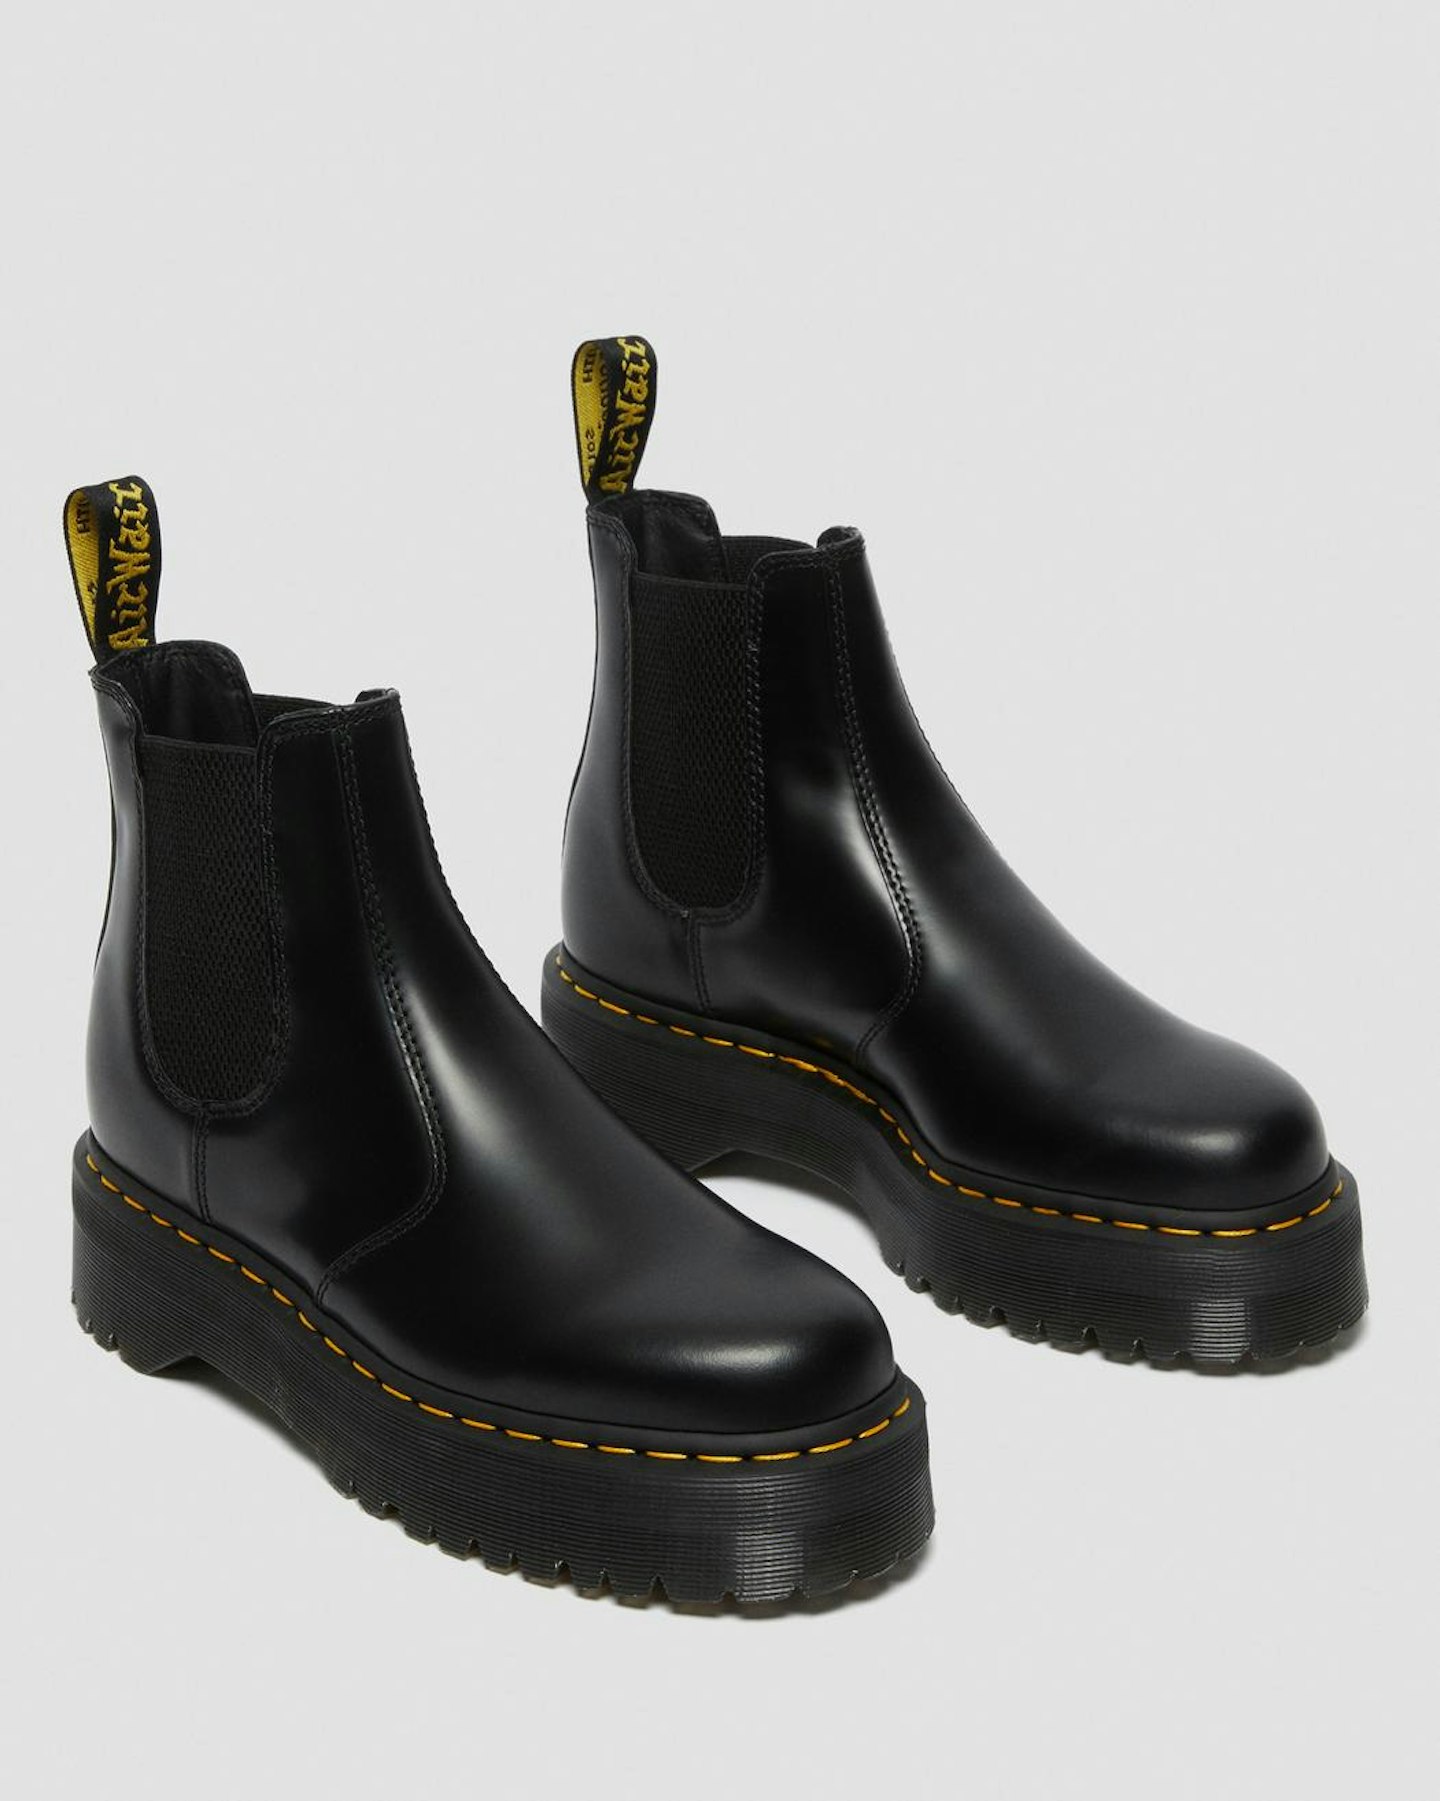 Lunchtime shop Friday - Dr. Martens, 2976 Bee Smooth Leather Chelsea Boots, £169